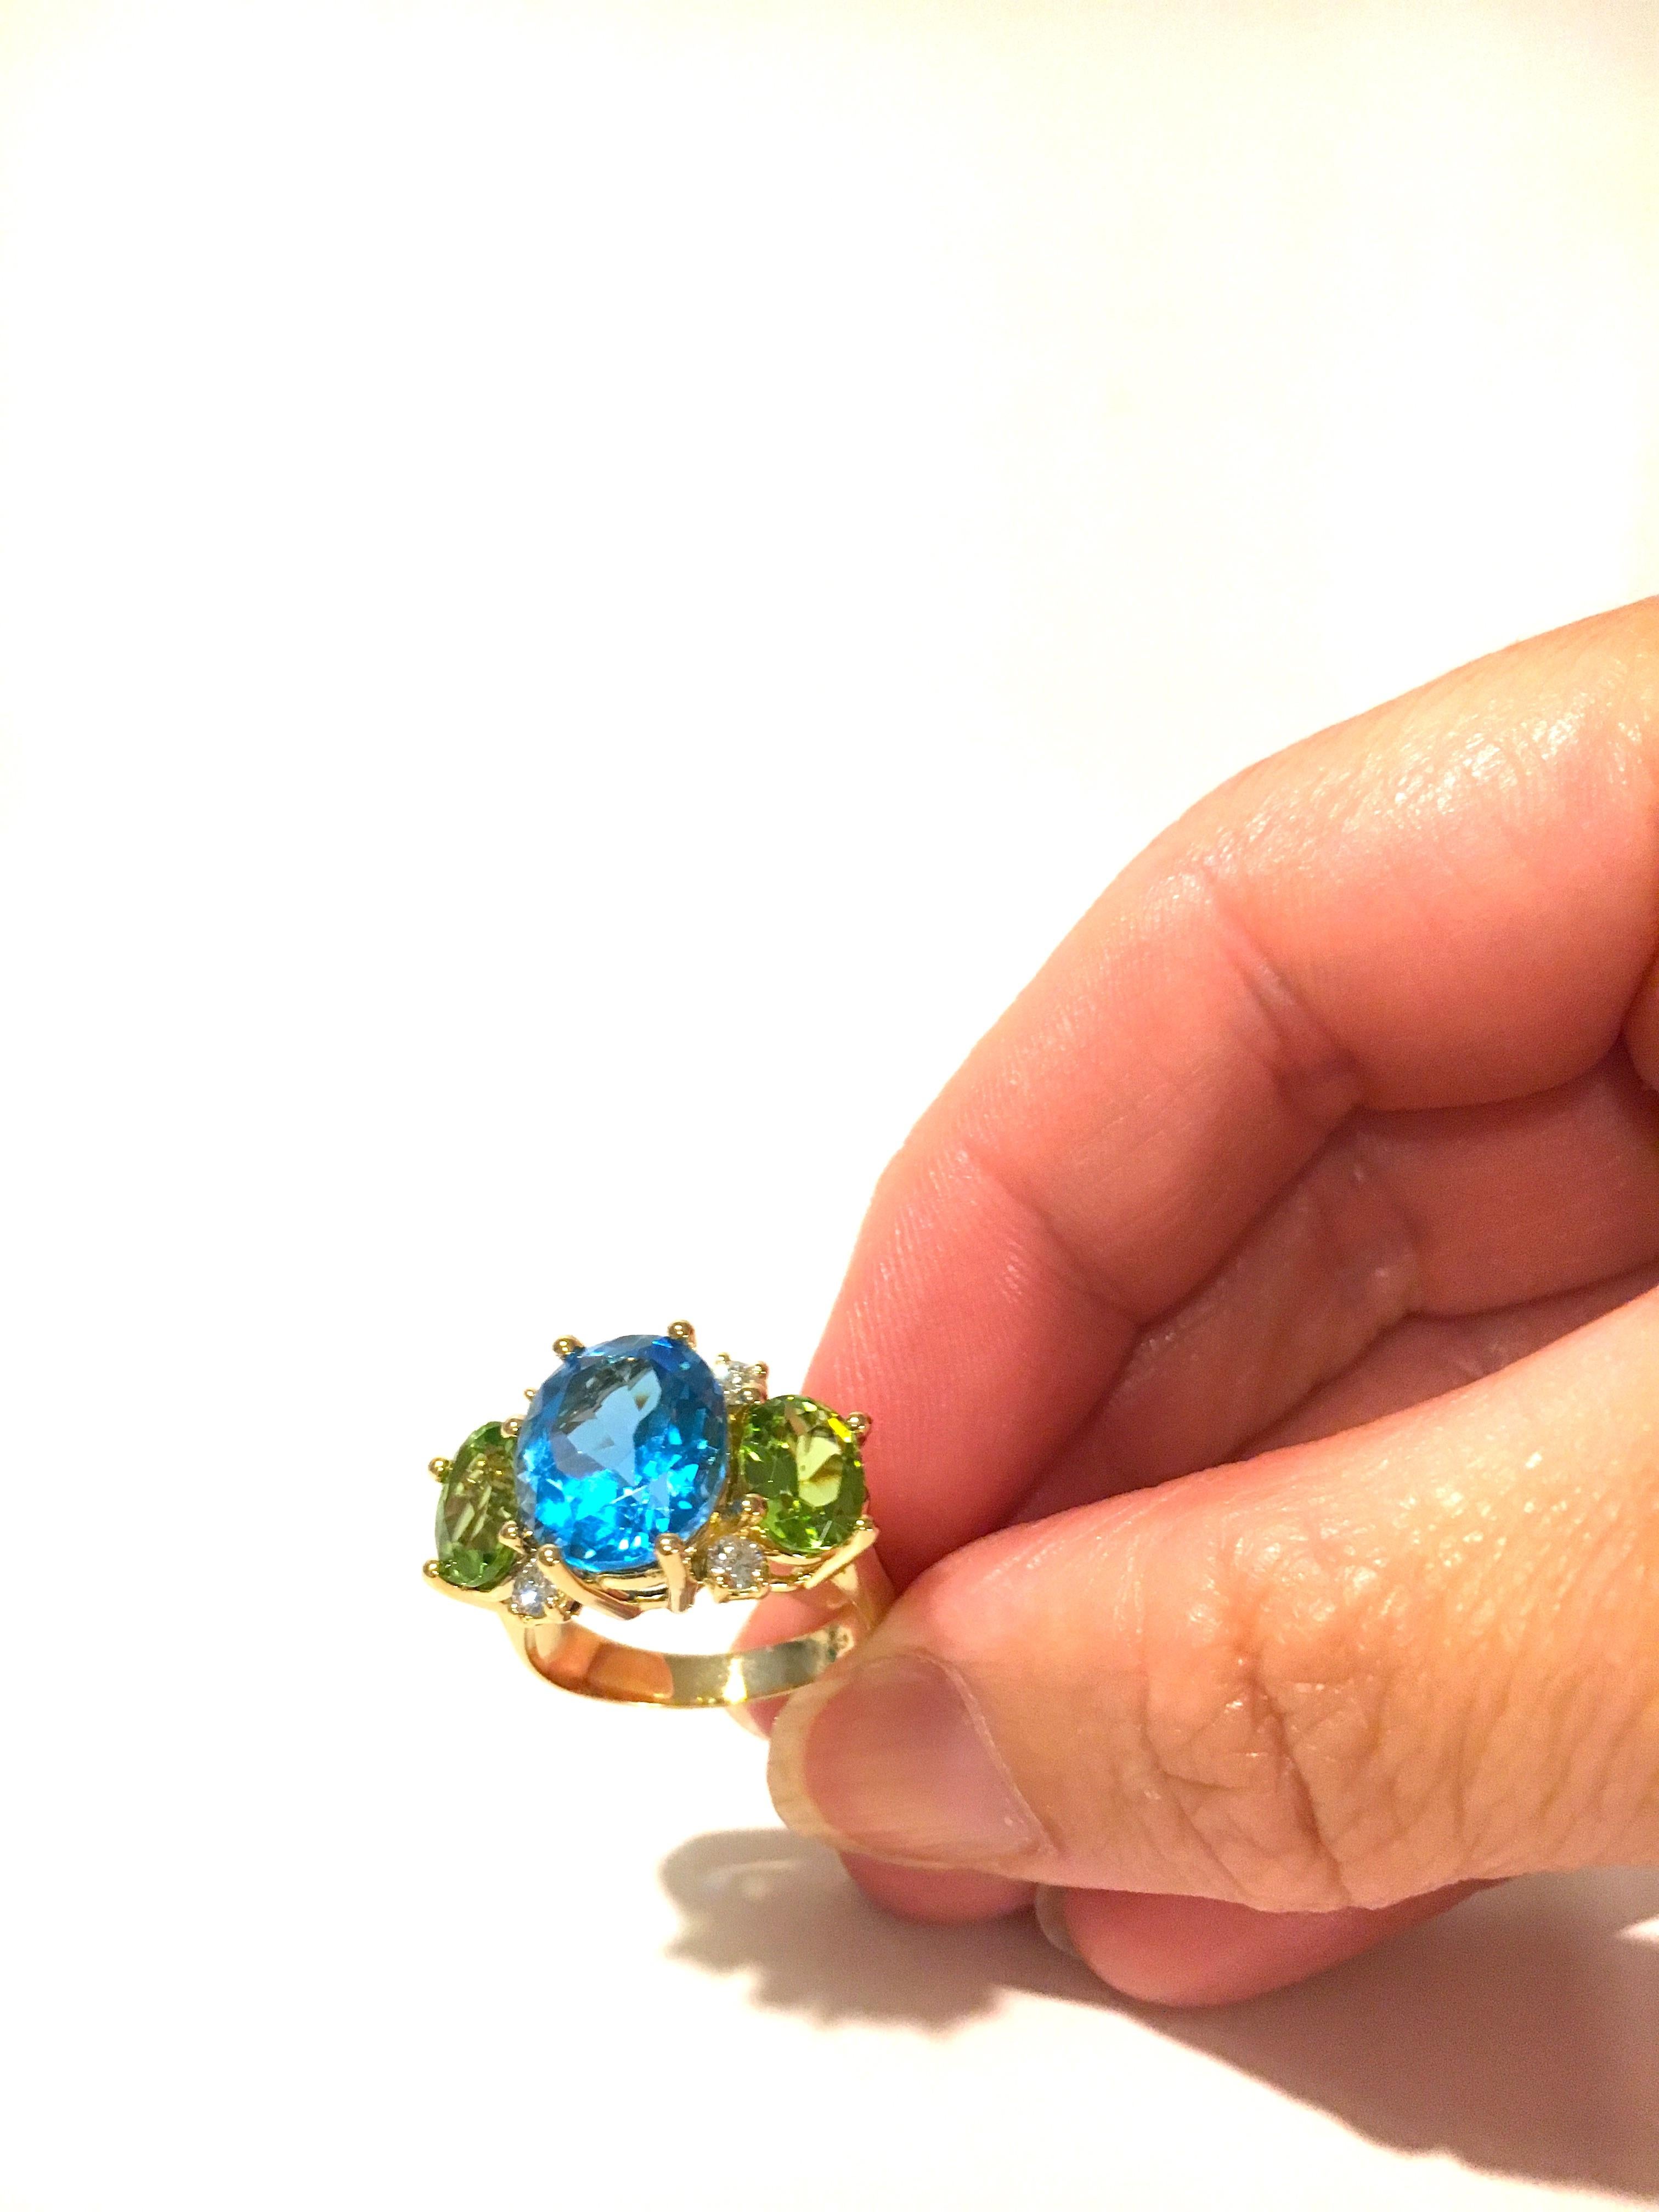 18kt Yellow Gold Medium GUM DROP™ Ring with faceted oval shaped center Blue opaz and two oval faceted Peridot and four round Diamonds ~0.50cts

The Ring measures ~ 1